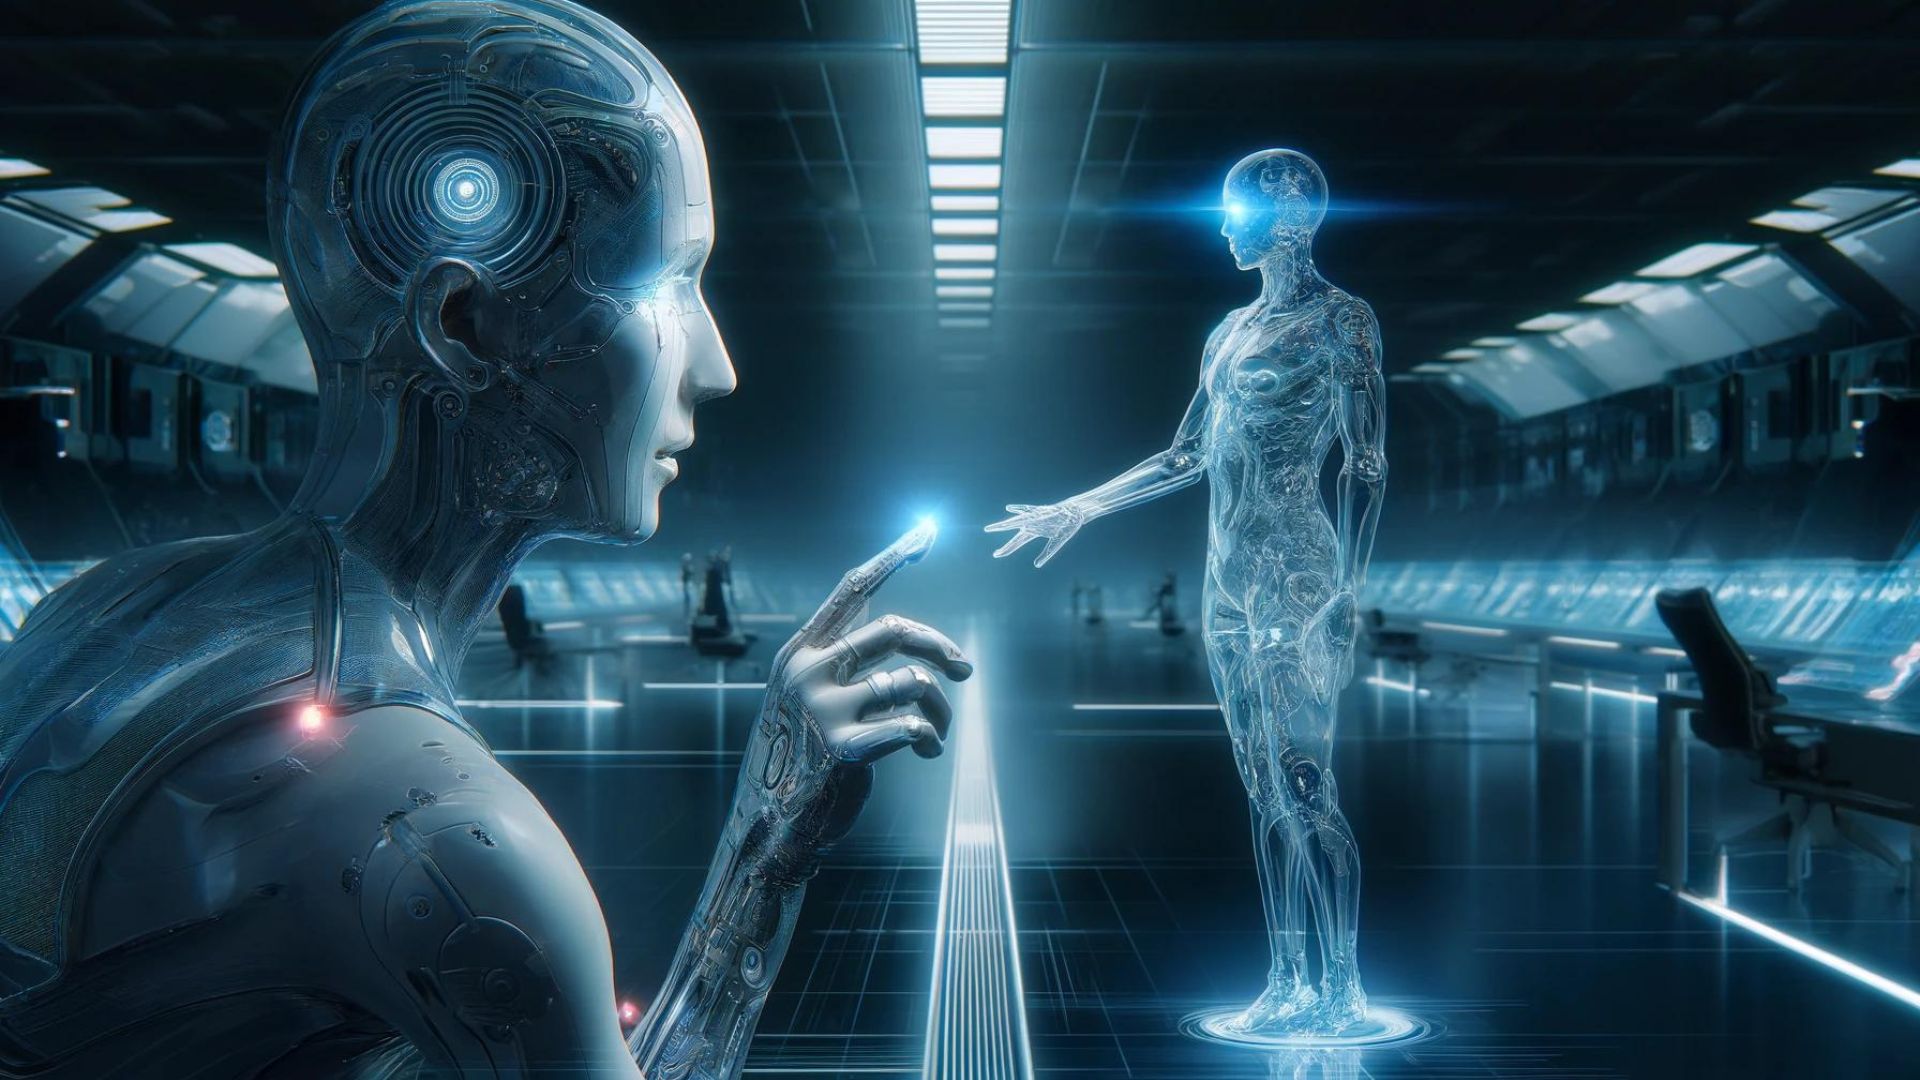 In the future where does the line between humans and machines blur